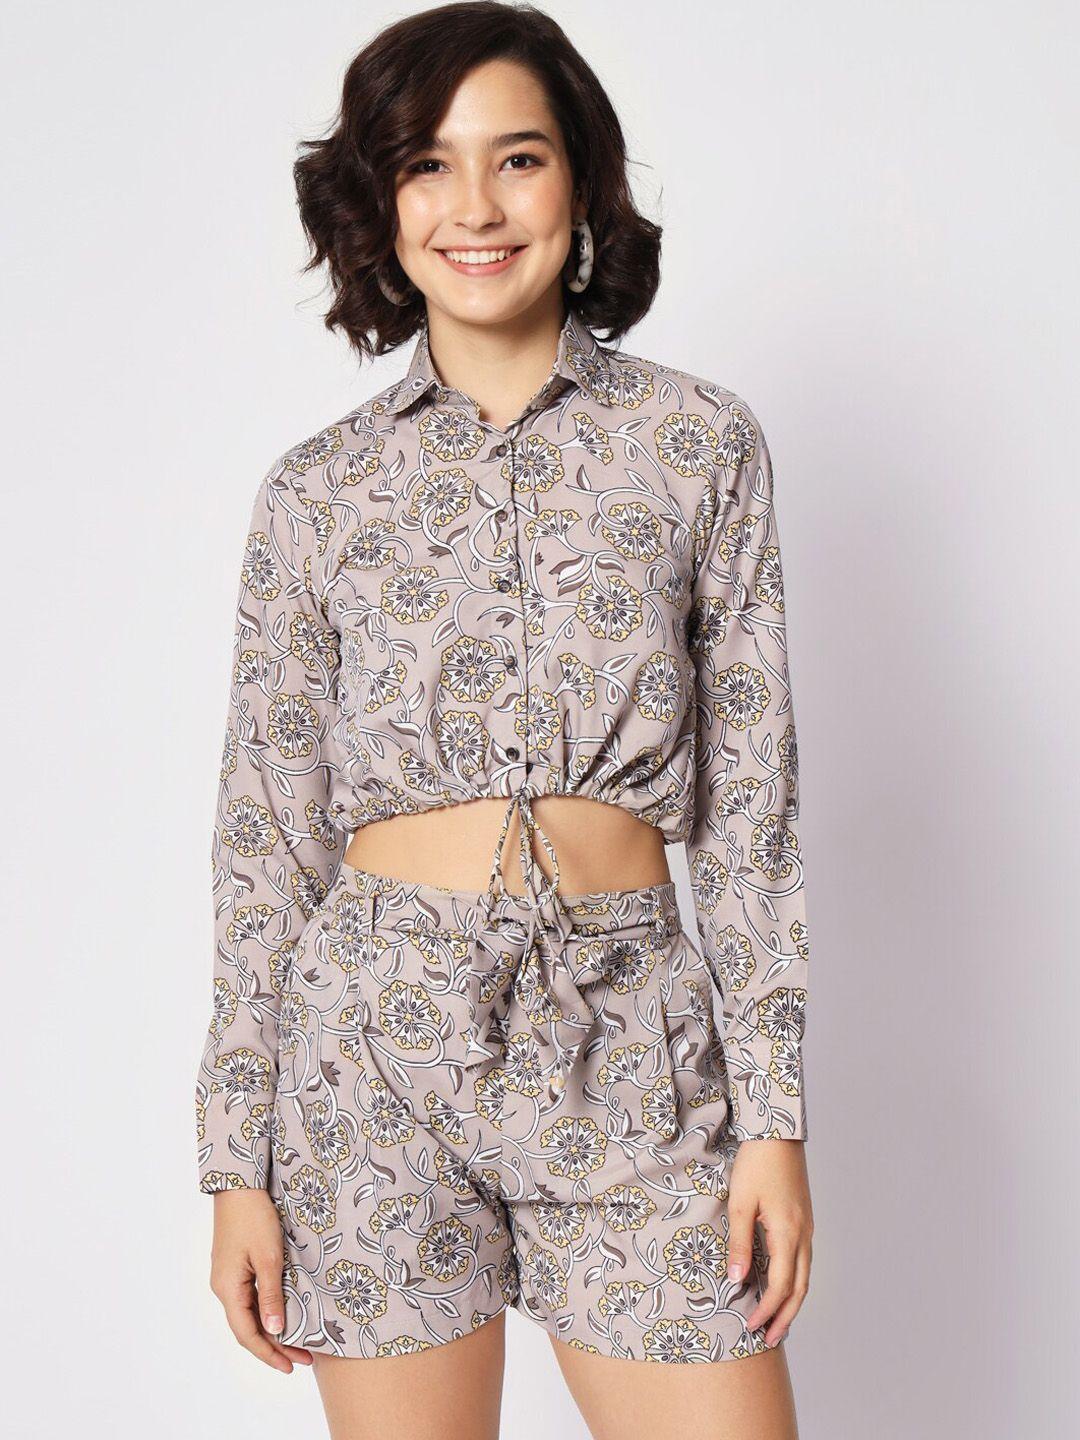 all about you floral printed shirt collar top & shorts